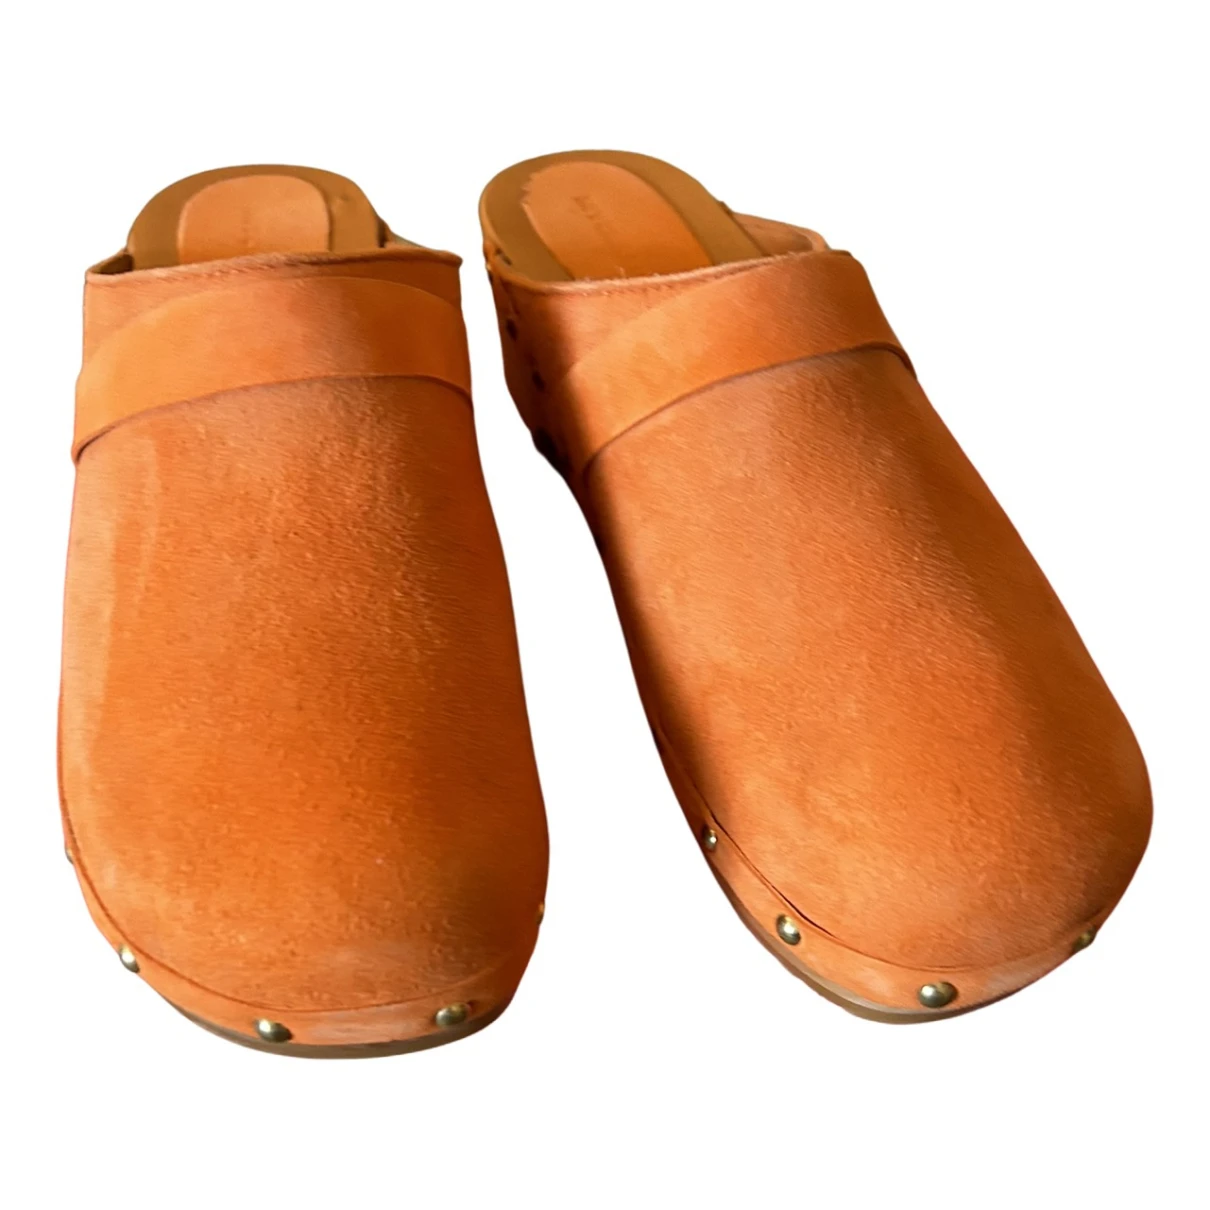 shoes Mychalom mules & clogs for Female Suede 40 EU. Used condition